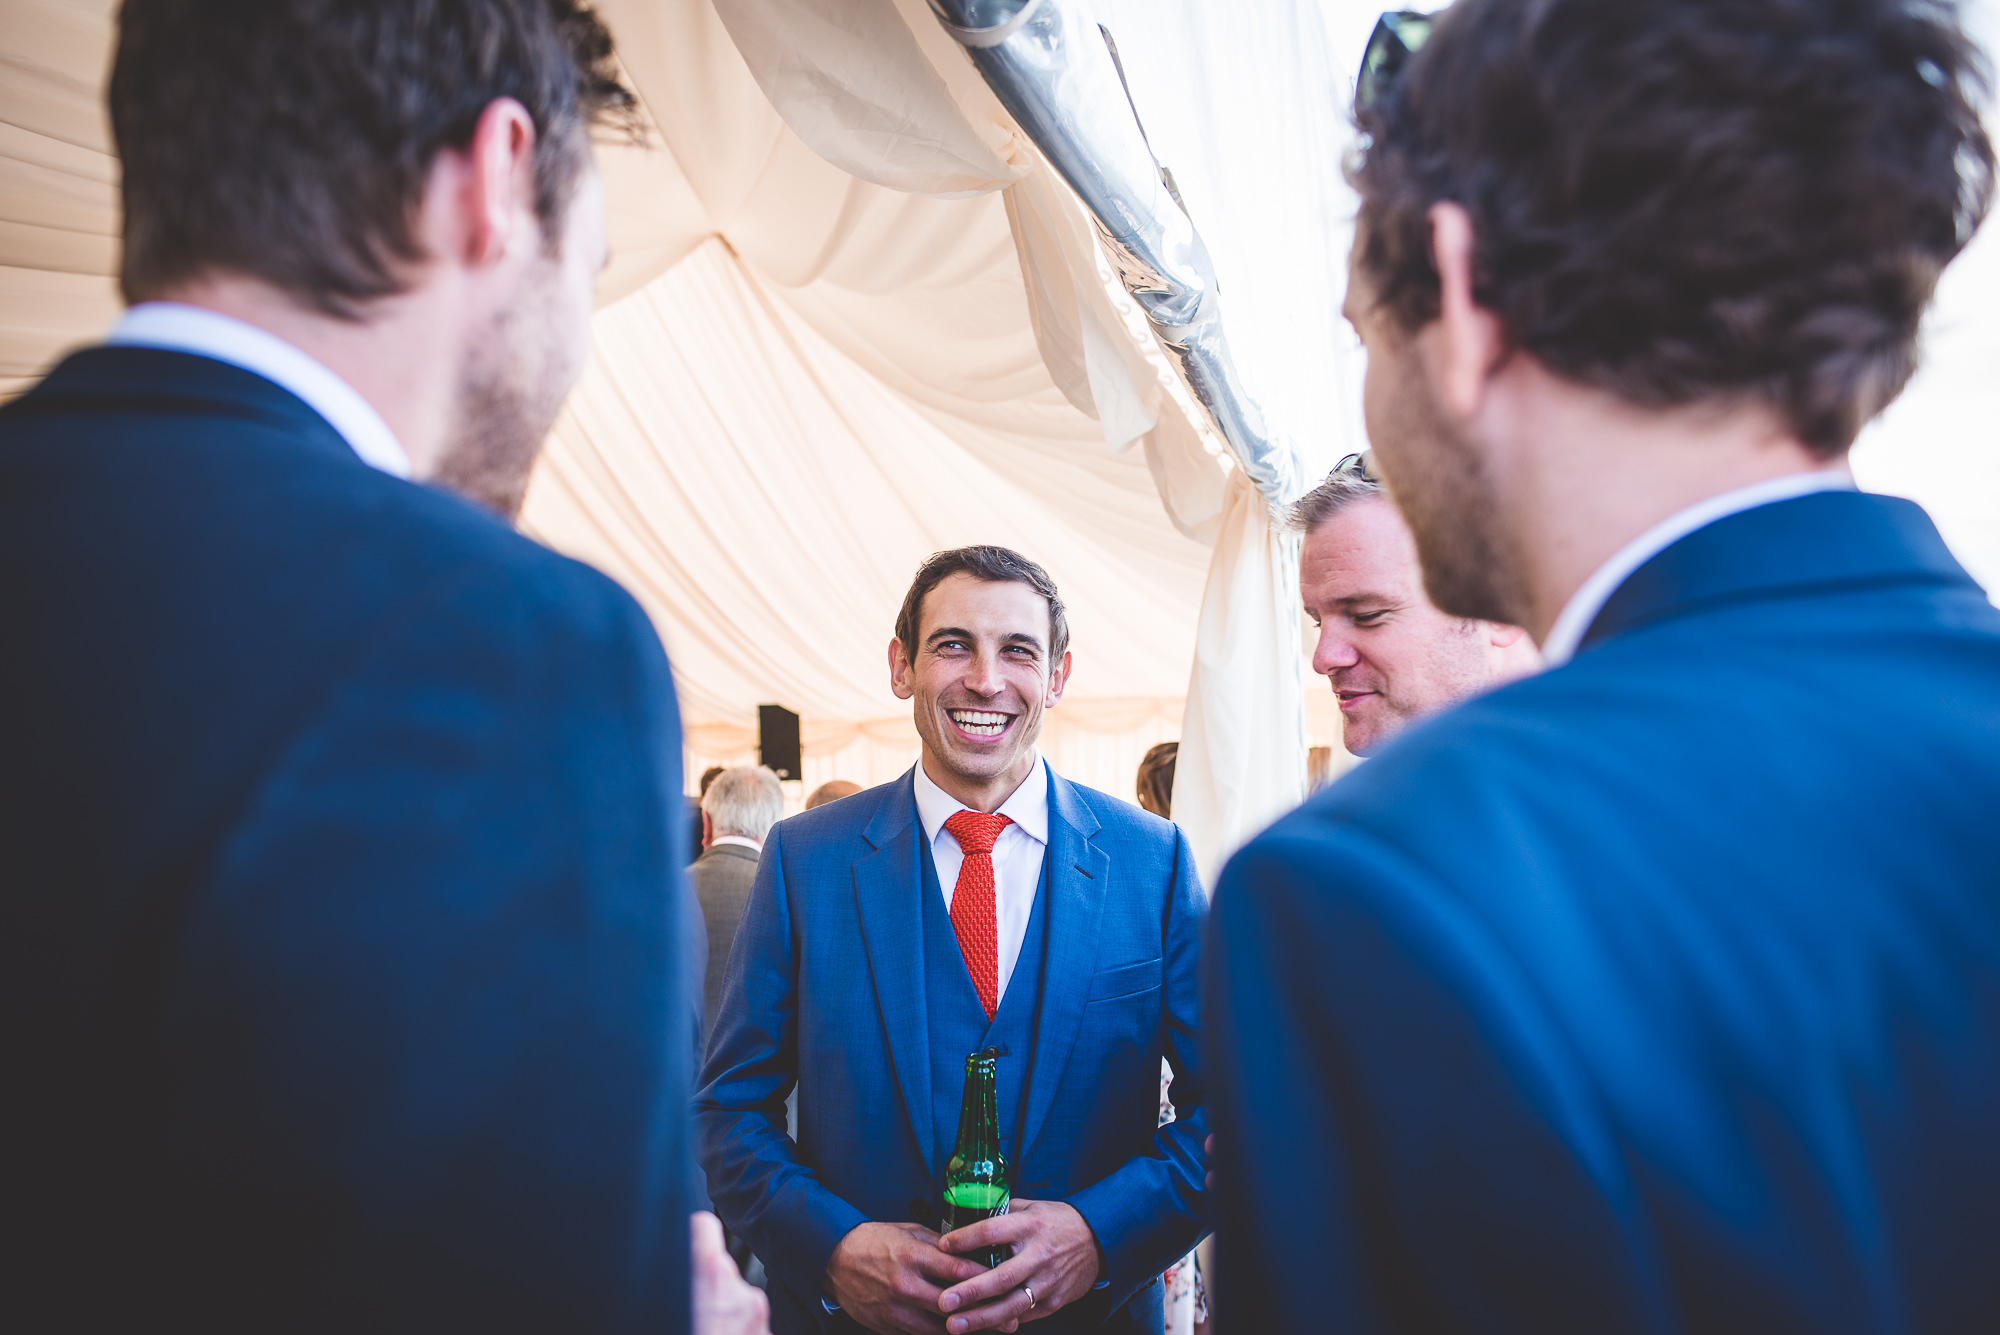 A group of men in suits talking at a wedding.